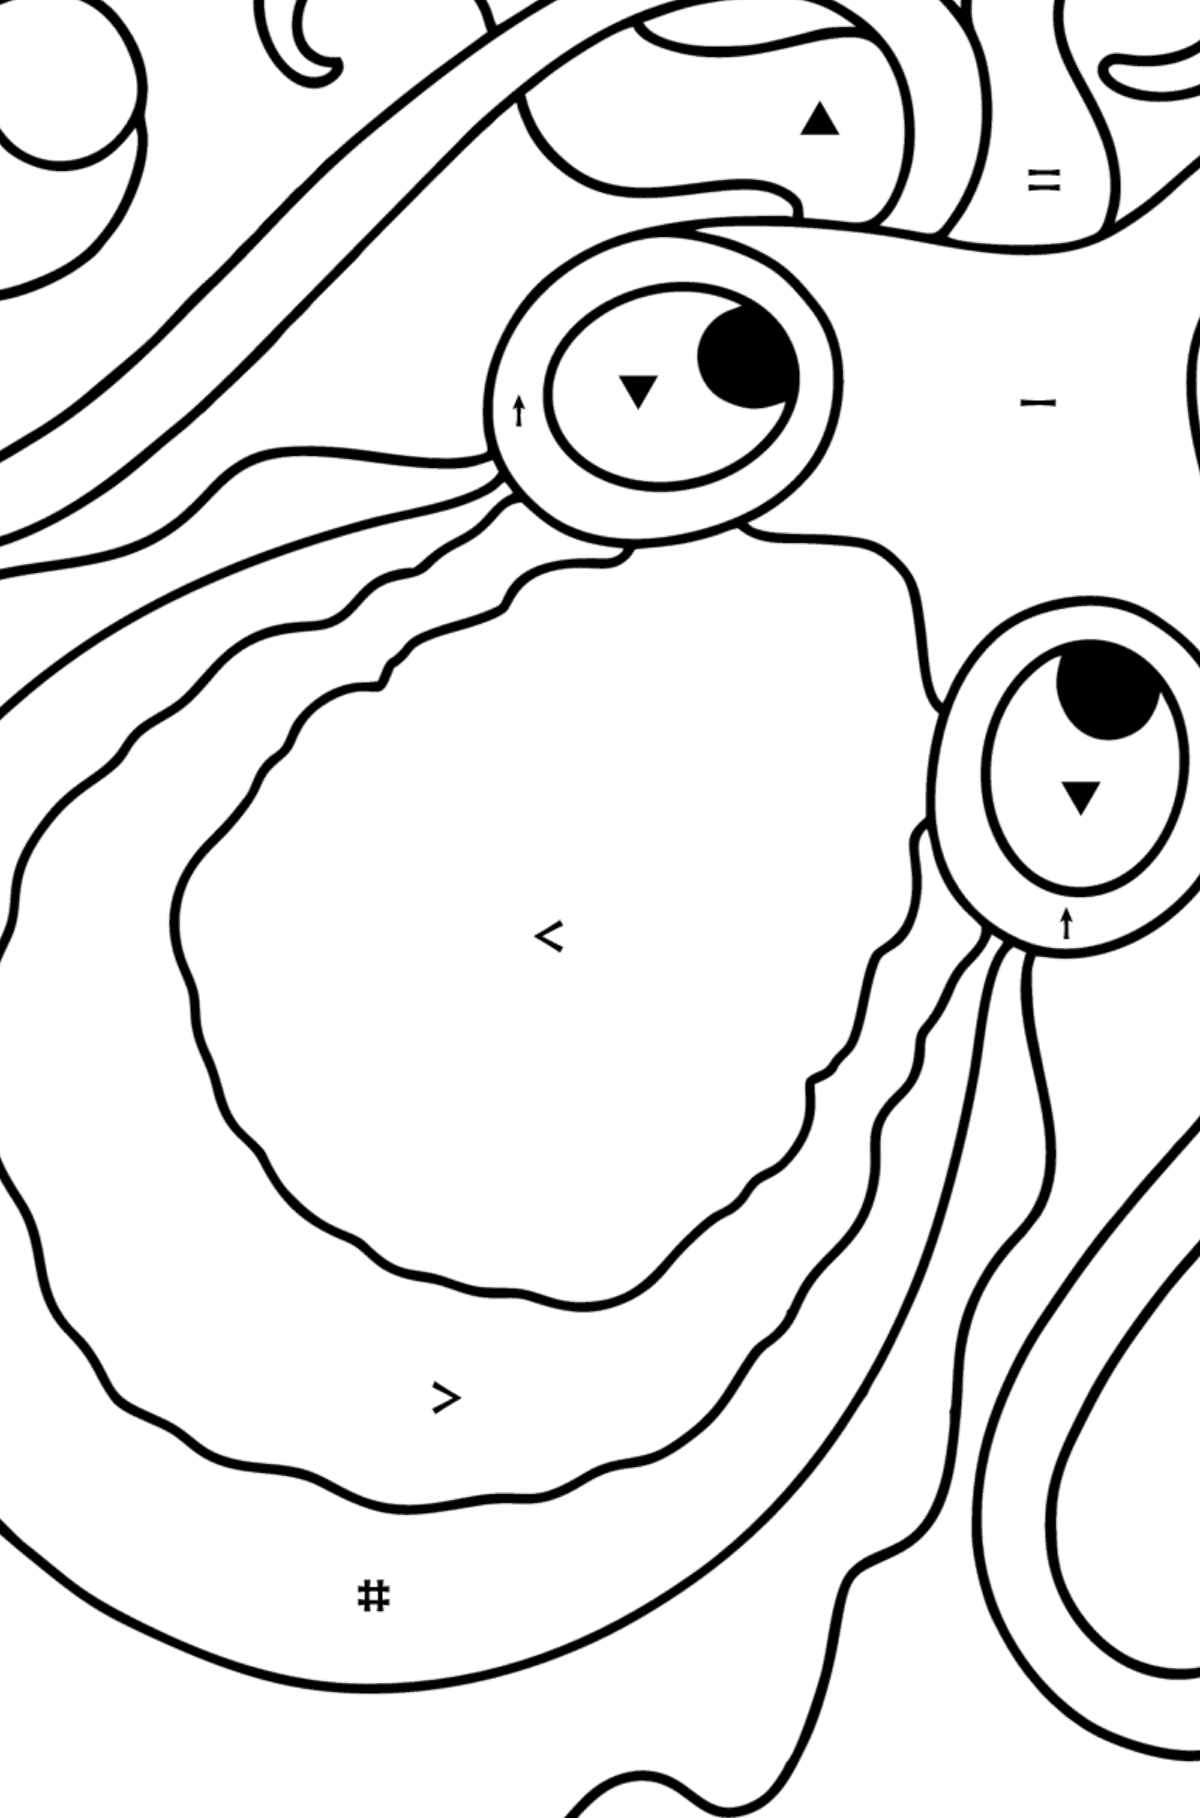 Cuttlefish coloring page - Coloring by Symbols for Kids